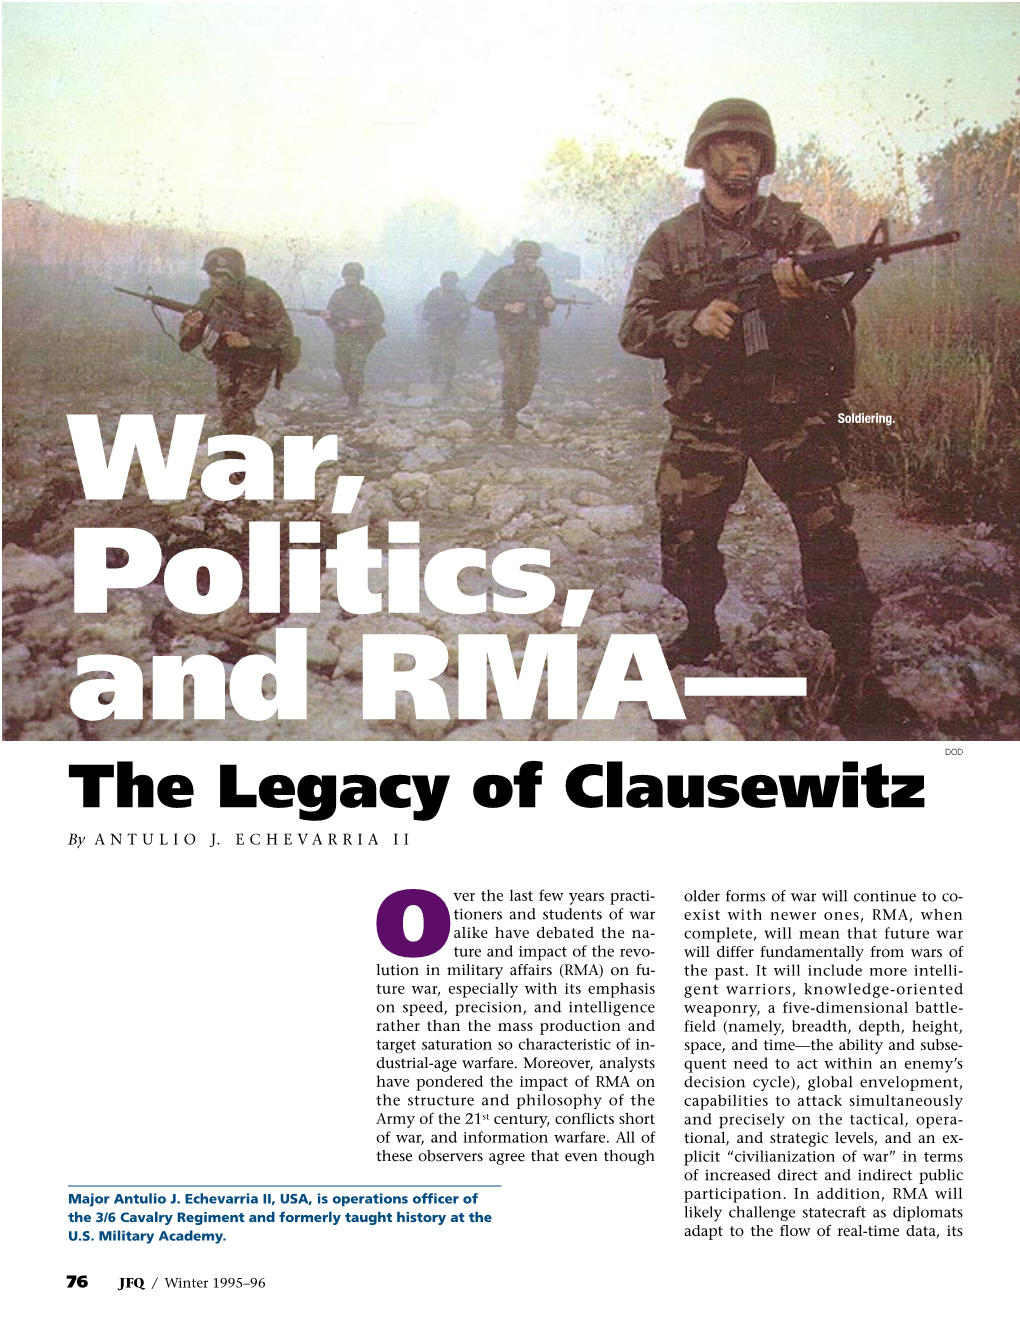 The Legacy of Clausewitz by ANTULIO J